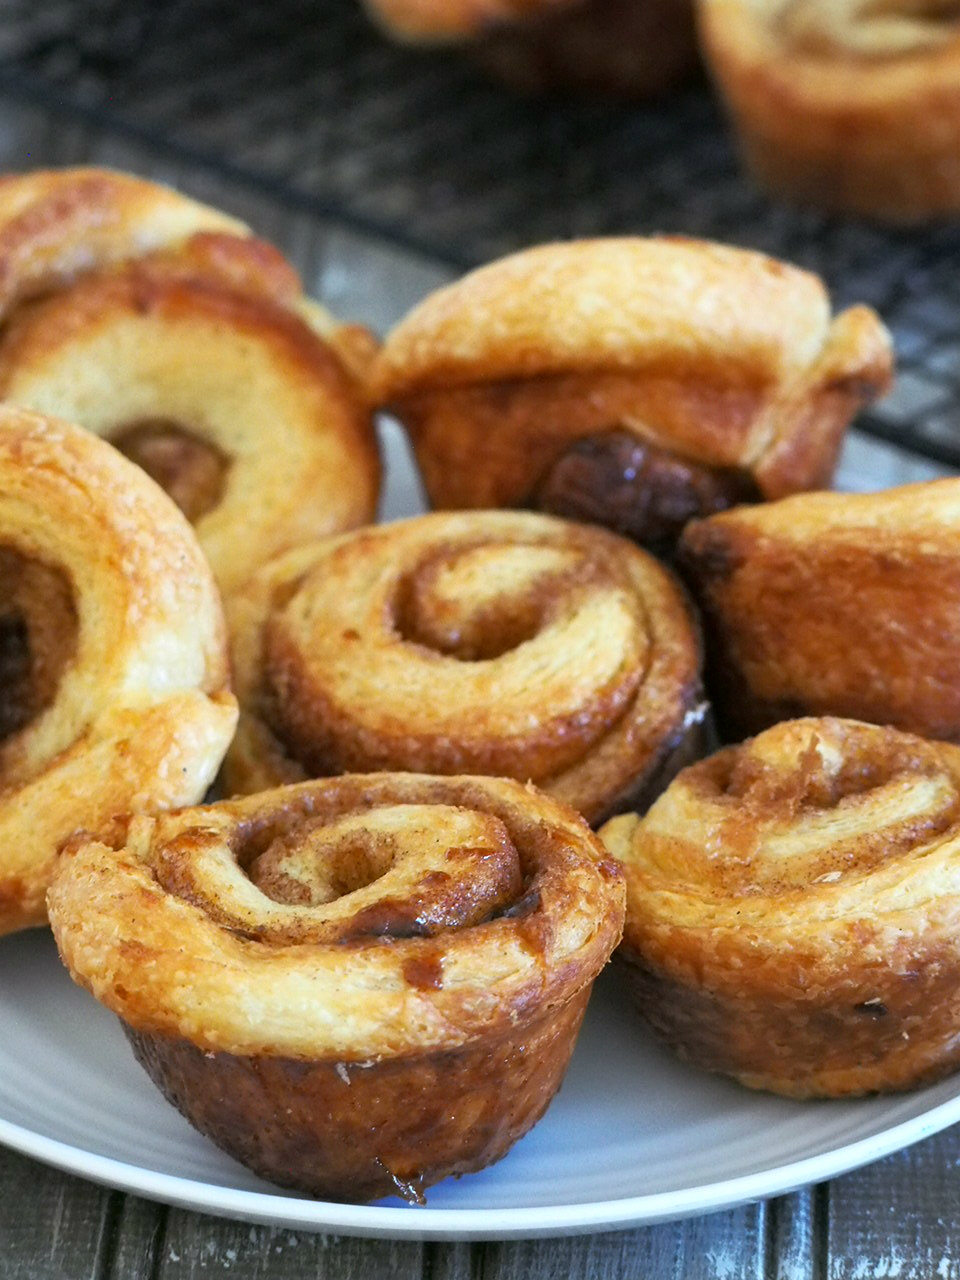 These morning buns are flaky and buttery croissants rolled with flavorful filling of cinnamon, sugar, butter and orange zest. They are amazing snacks, breakfast or desserts.